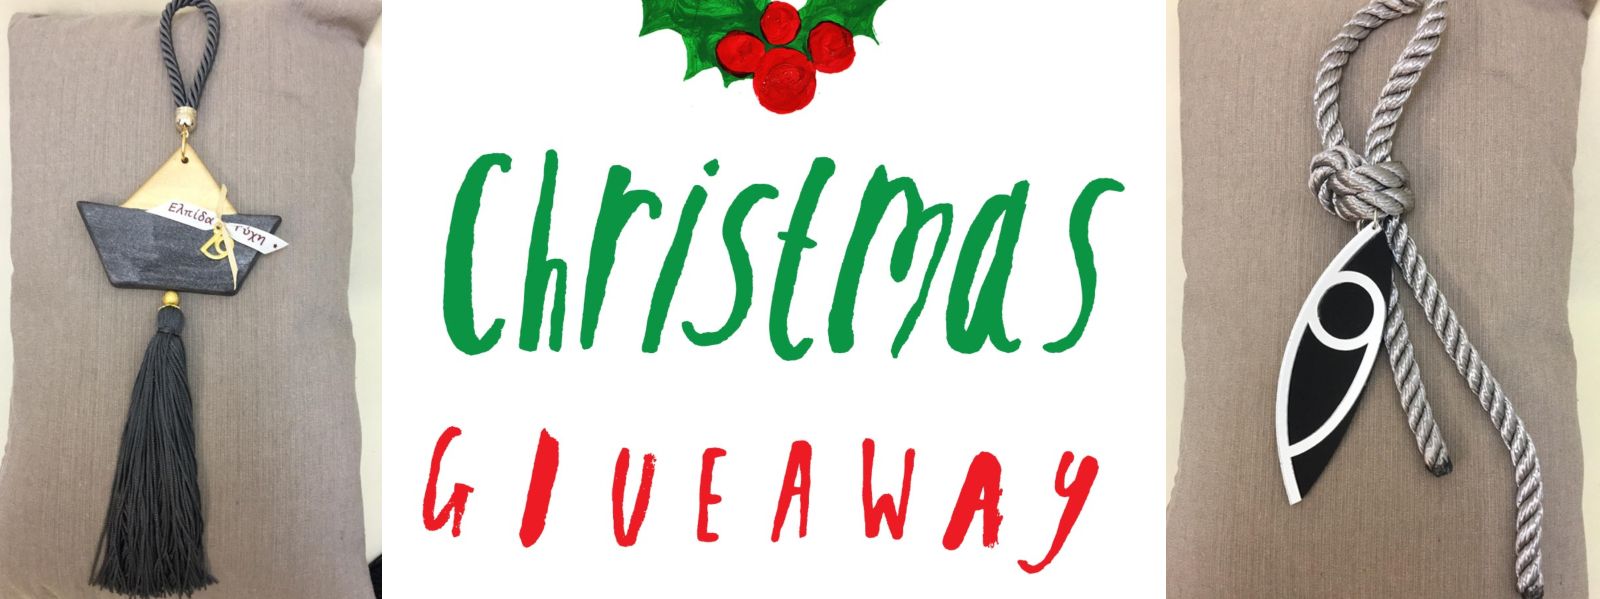 images easyblog articles 7046 christmas giveaway andioropoulos 29b8cbf7